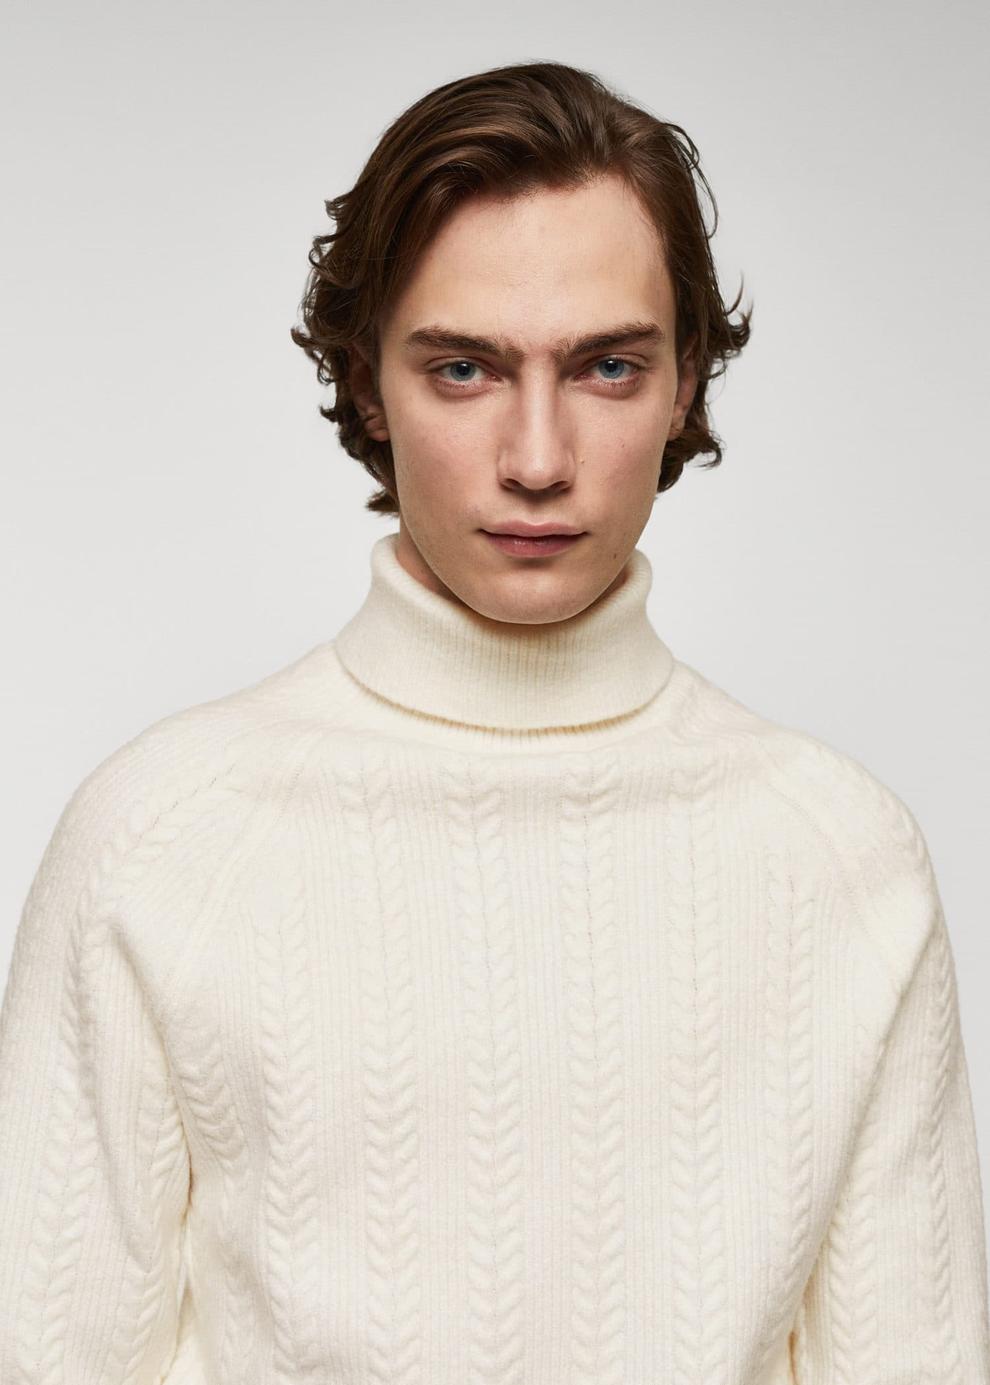 Twisted turtleneck sweater offers at S$ 89.9 in HE by Mango